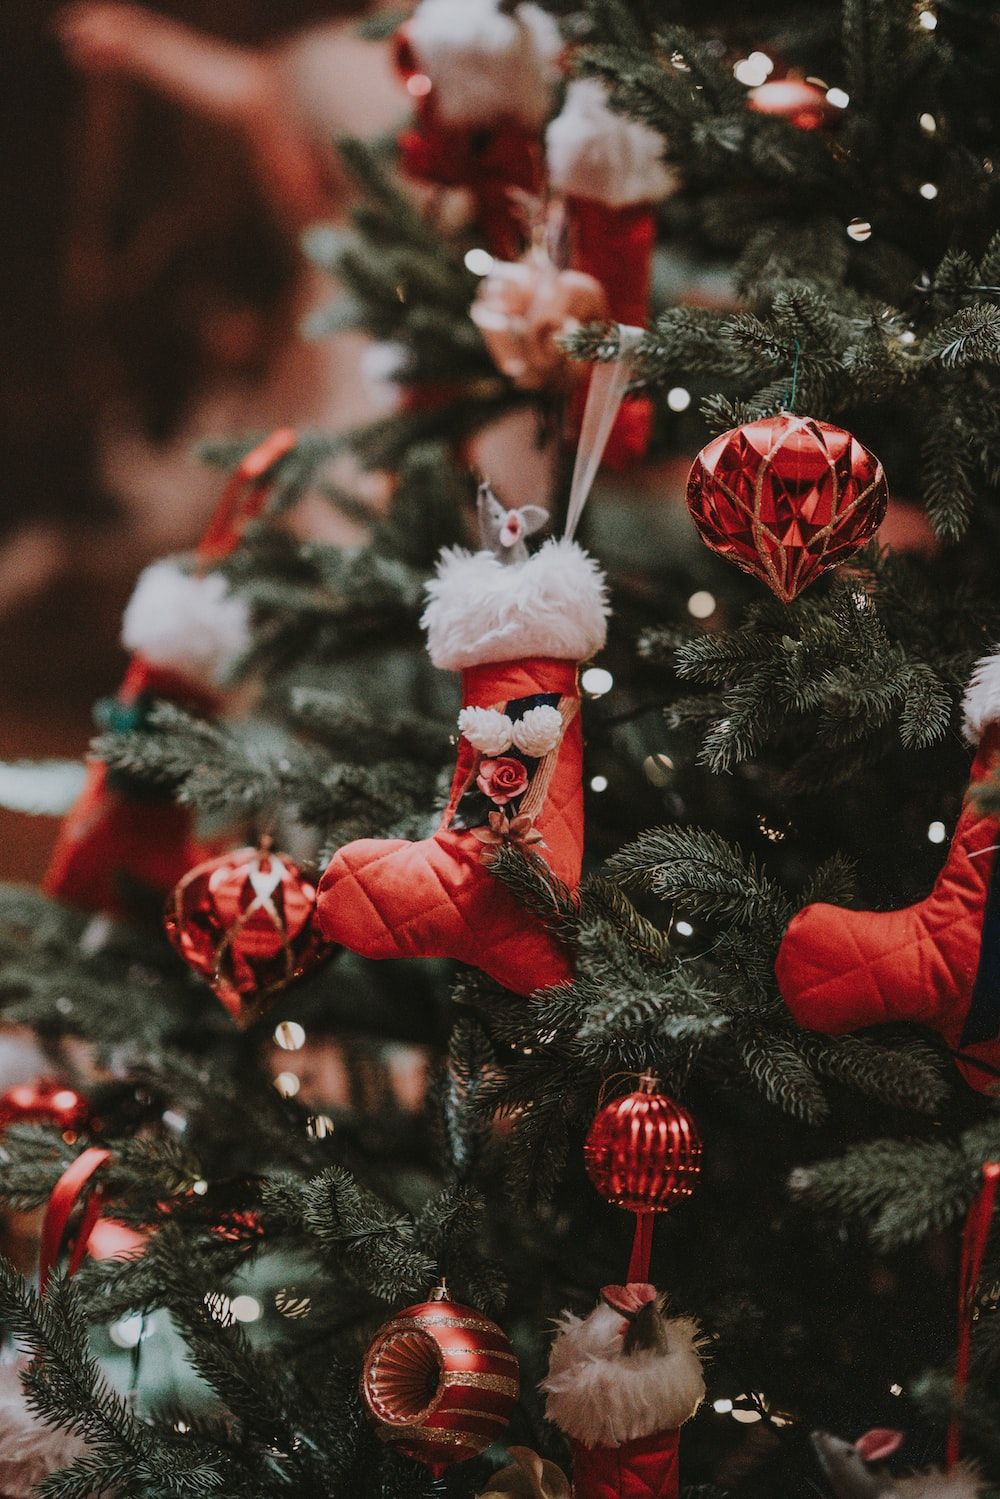 A close up of a Christmas tree with red and white ornaments. - Christmas, cute Christmas